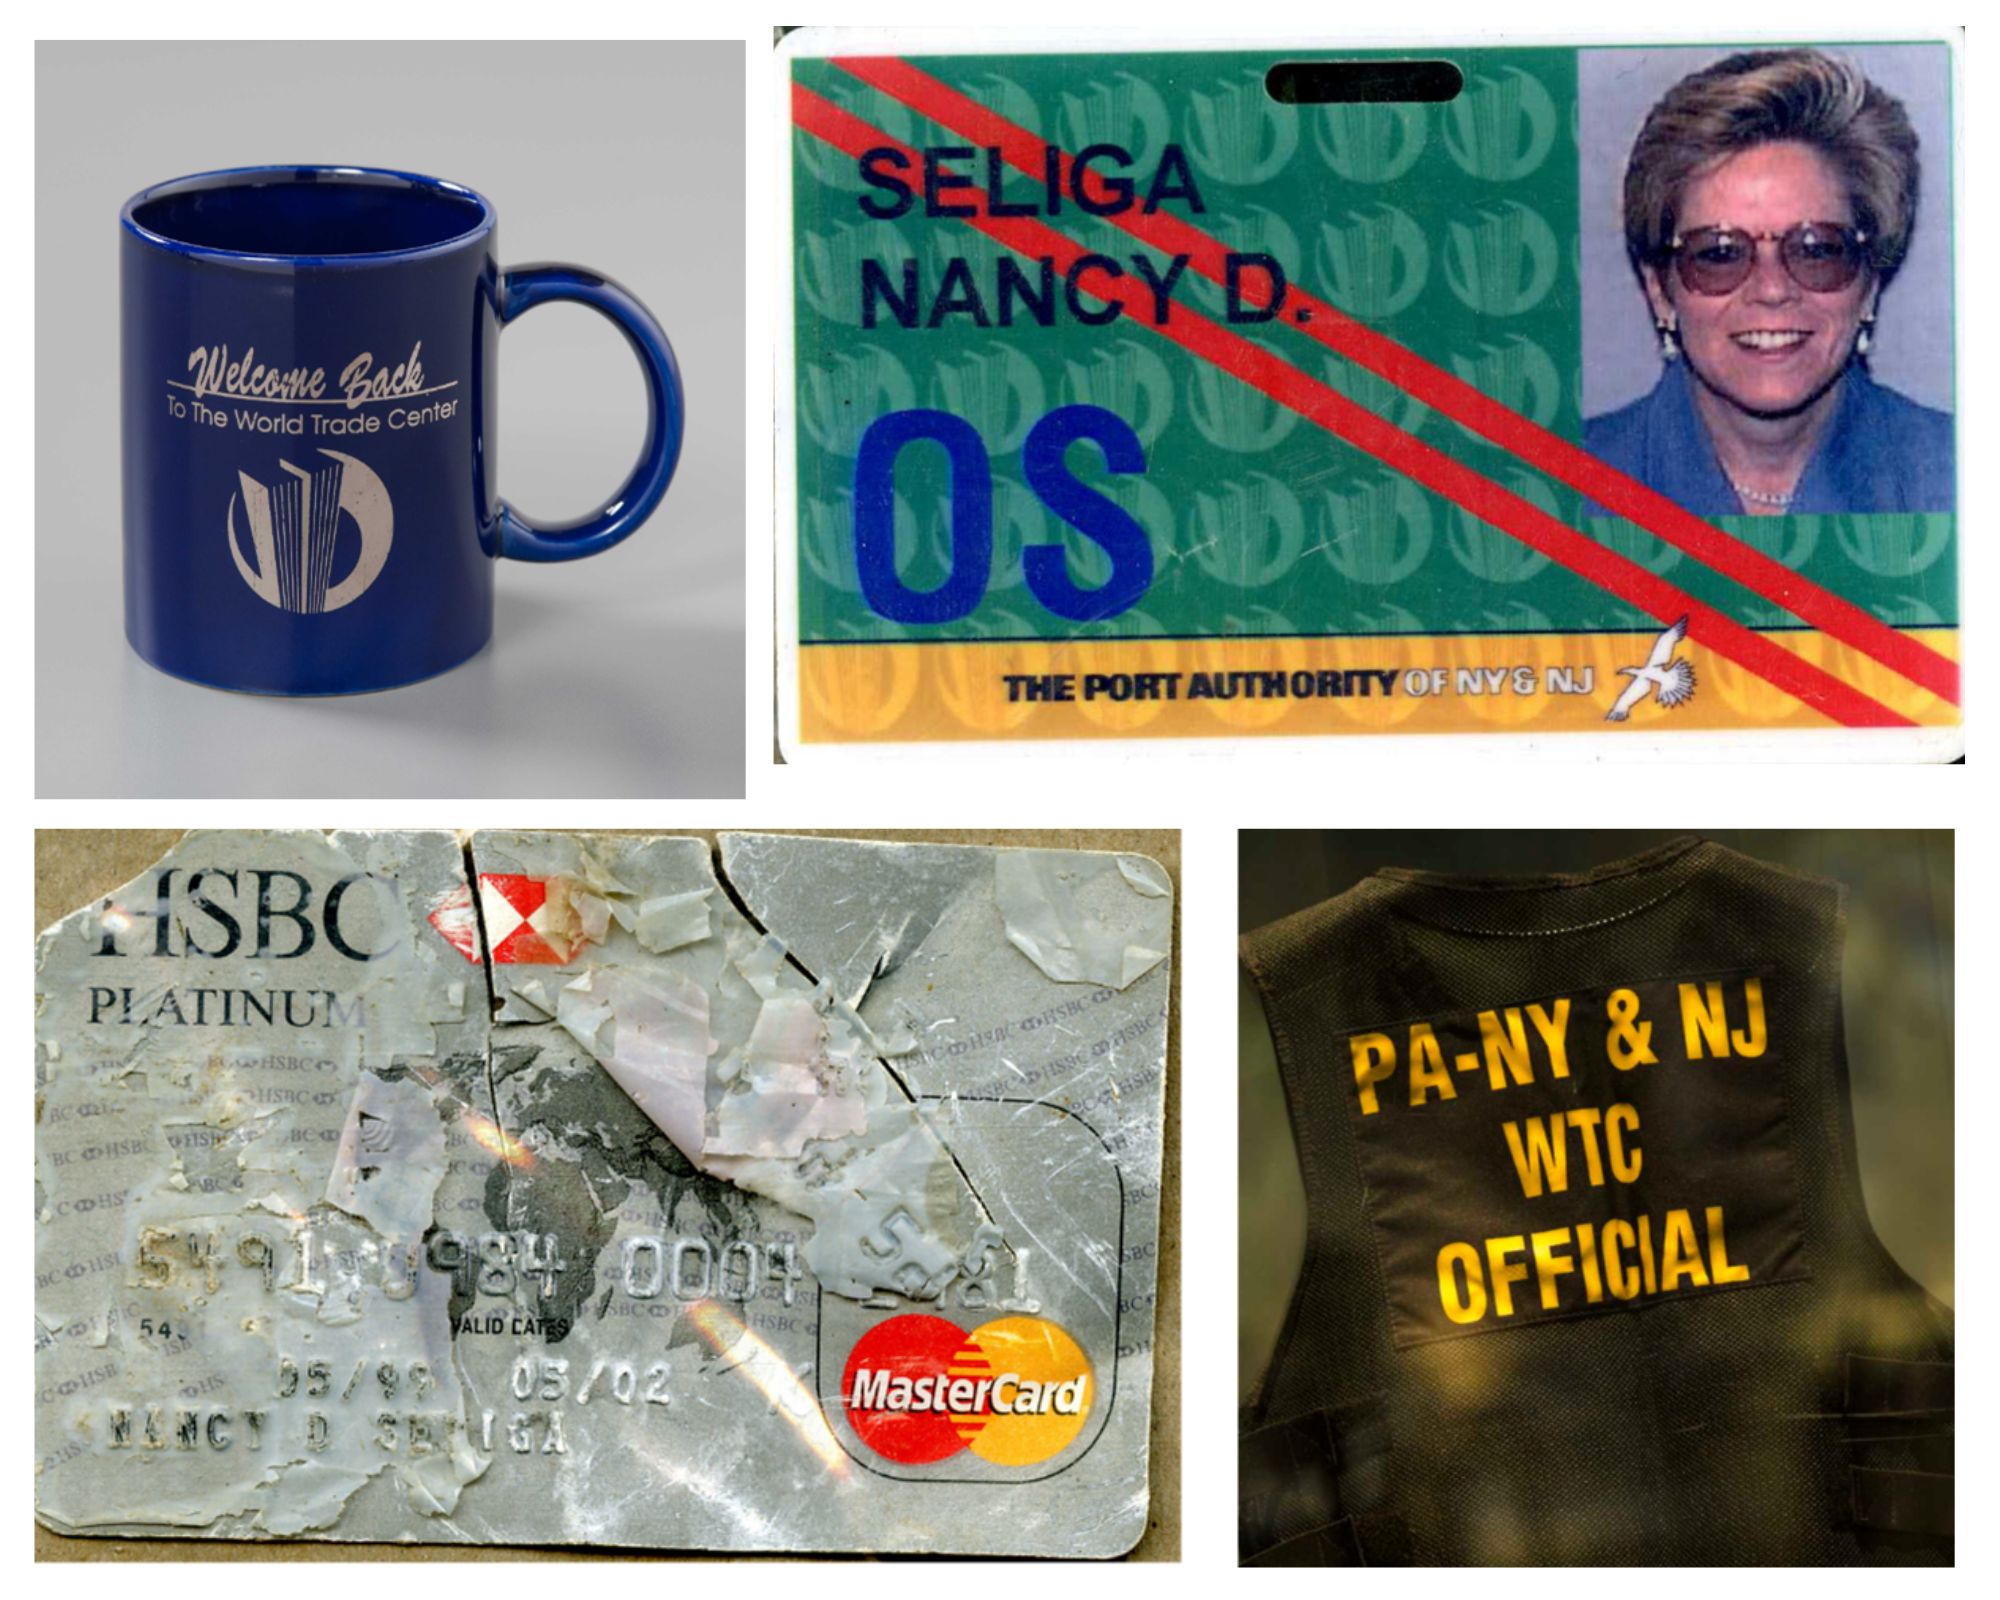 Blue and gold "Welcome Back" mug; Nancy Seliga's building ID; Port Authority safety vest; Seliga's damaged Mastercard, returned to her after 9/11